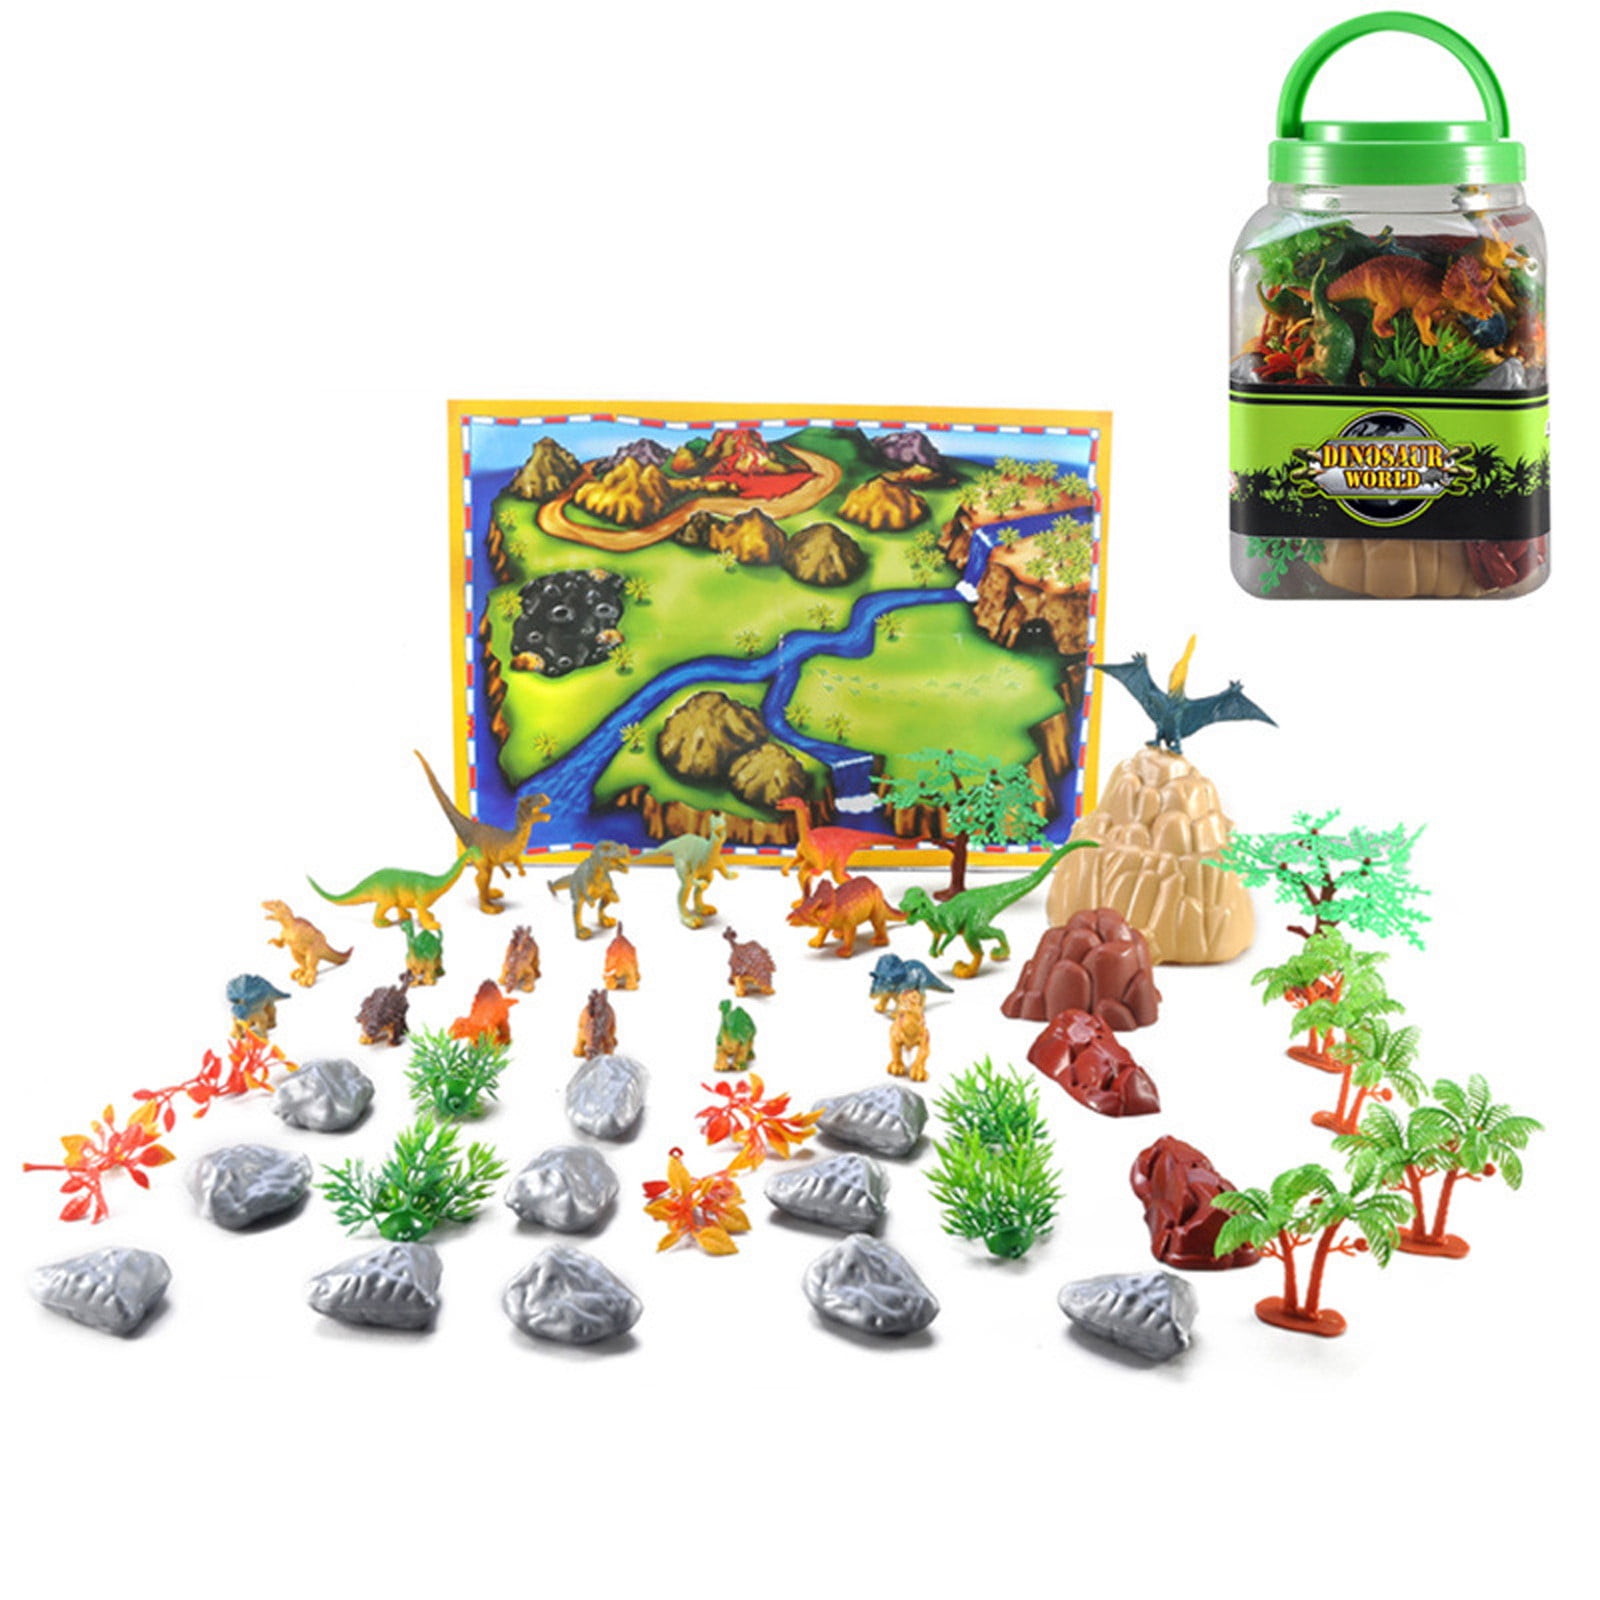 Details about   90 Pieces Animal Jurassic Dinosaur Model Scene Playset Kids Toy Gift 